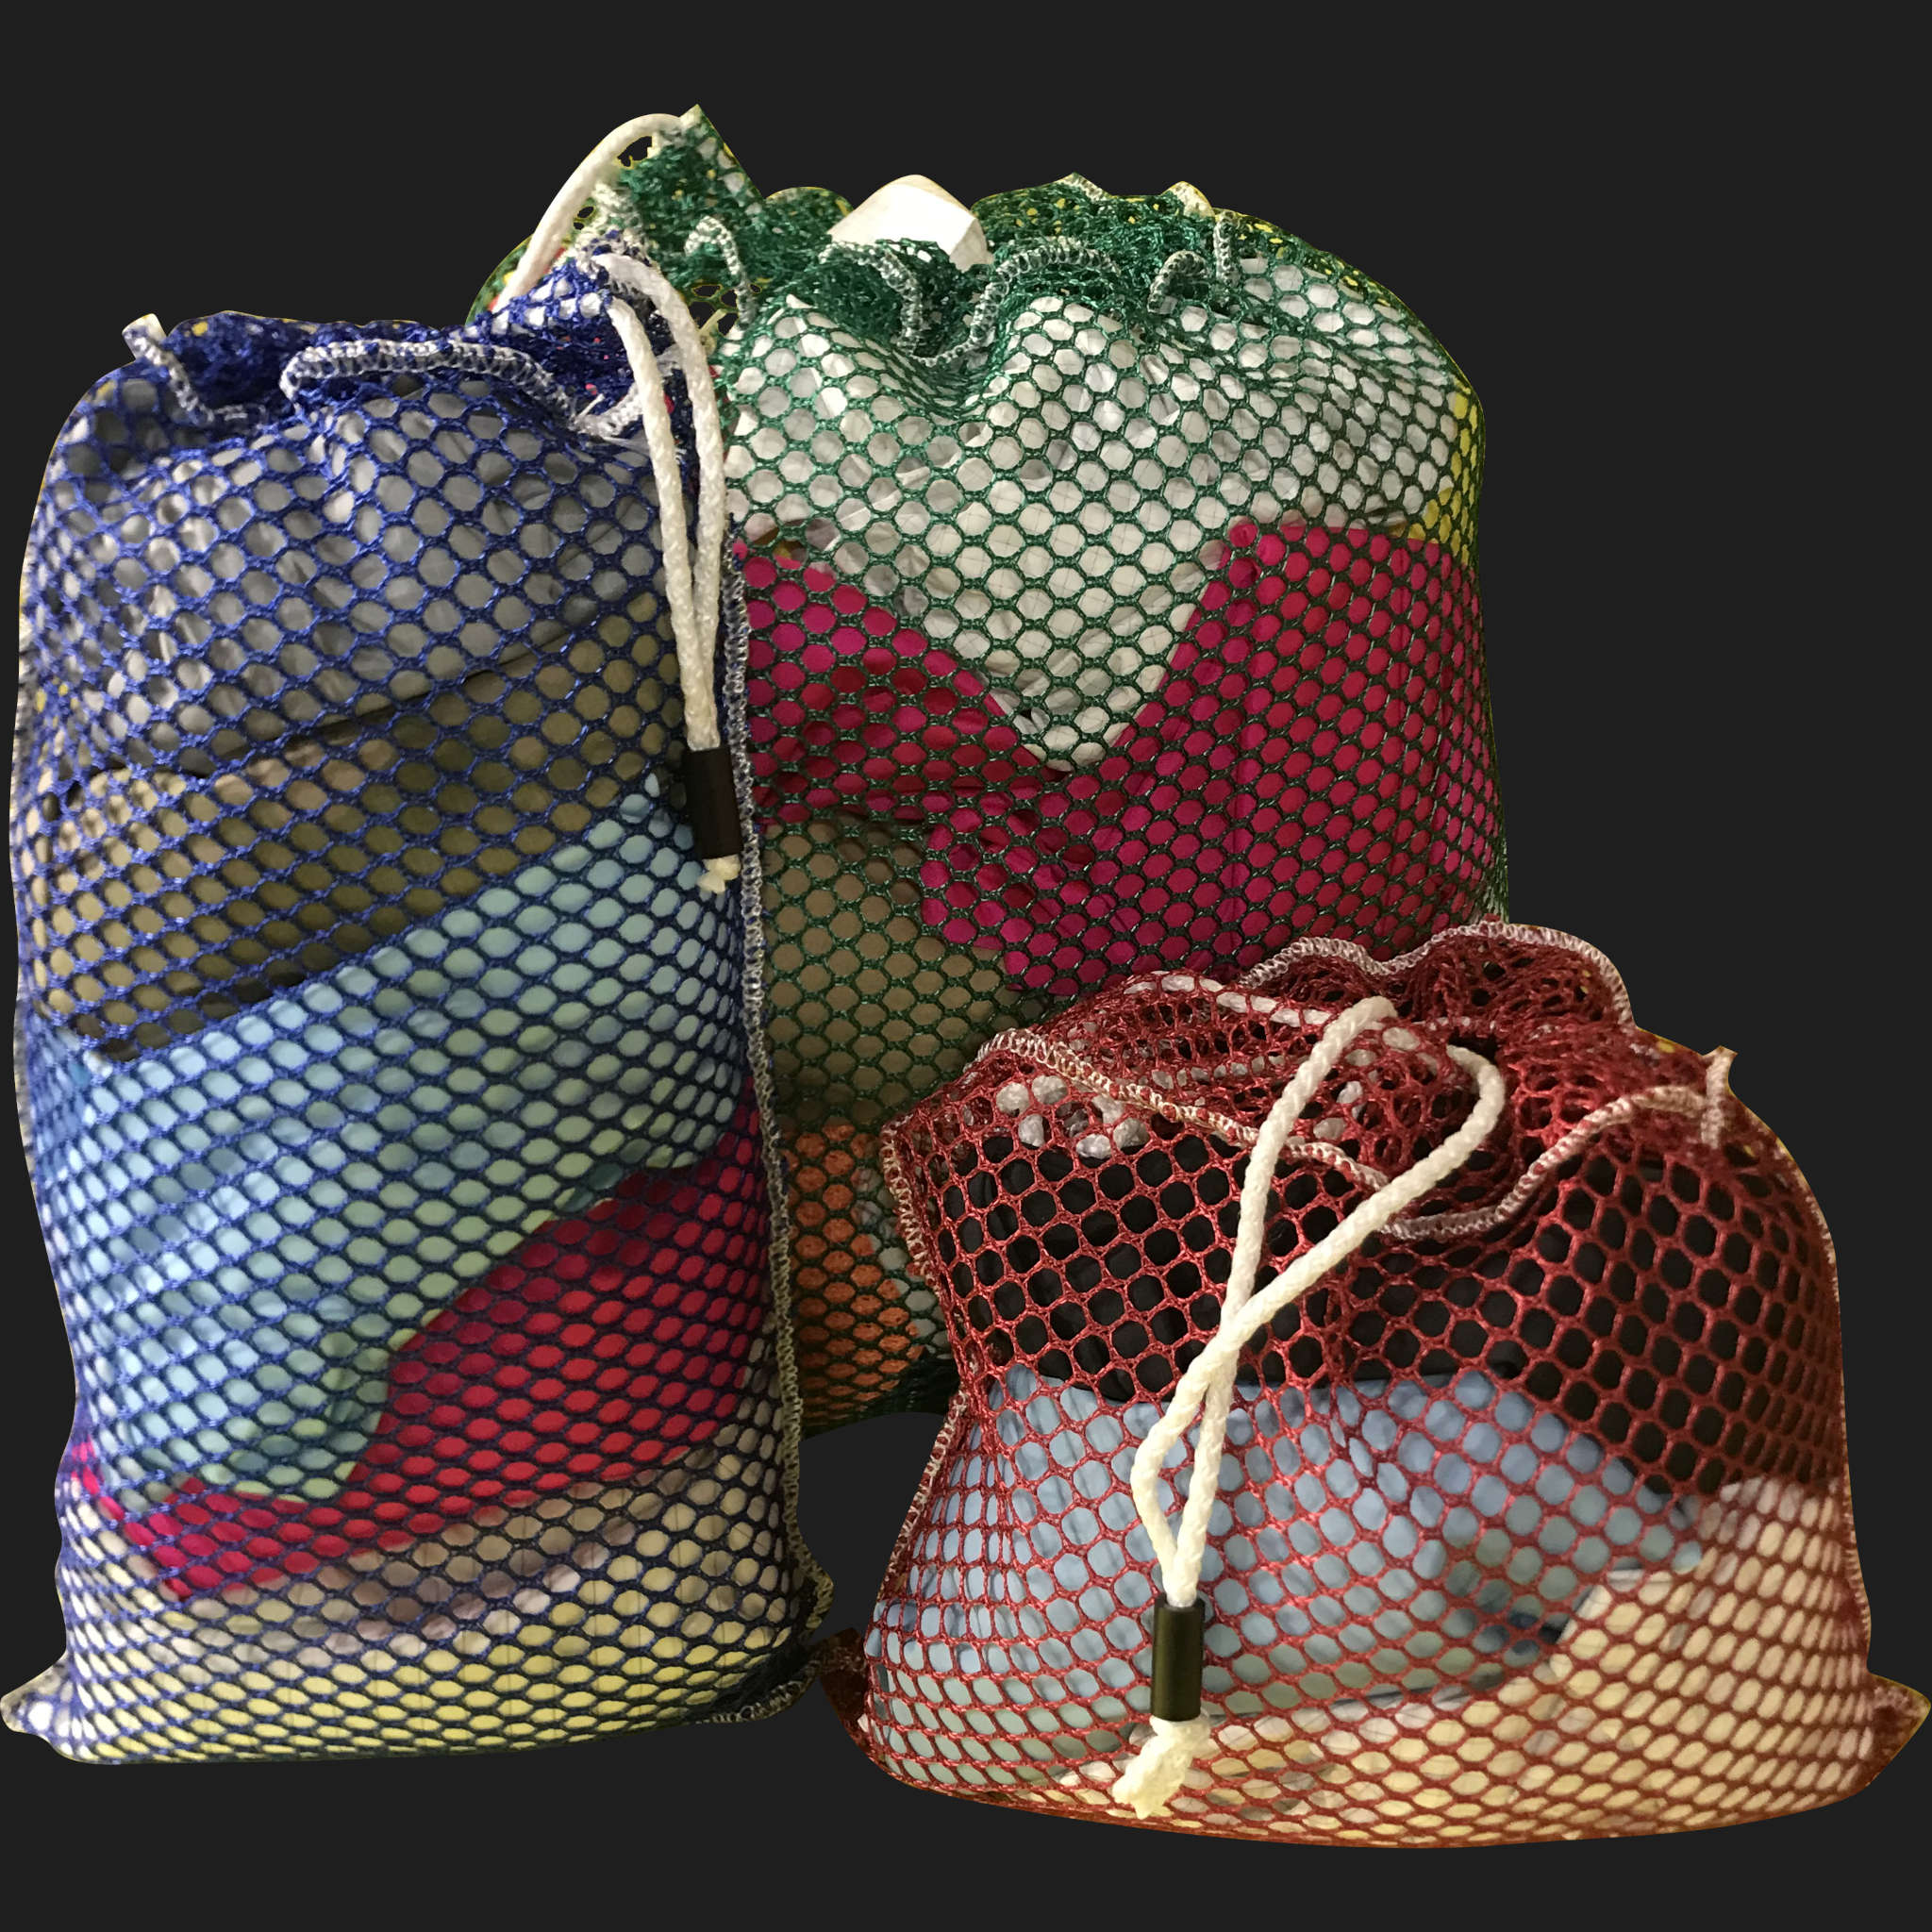 26" x 52" Customized Mesh-Net-Laundry Bags Heavy Duty with Cord and barrellock closure